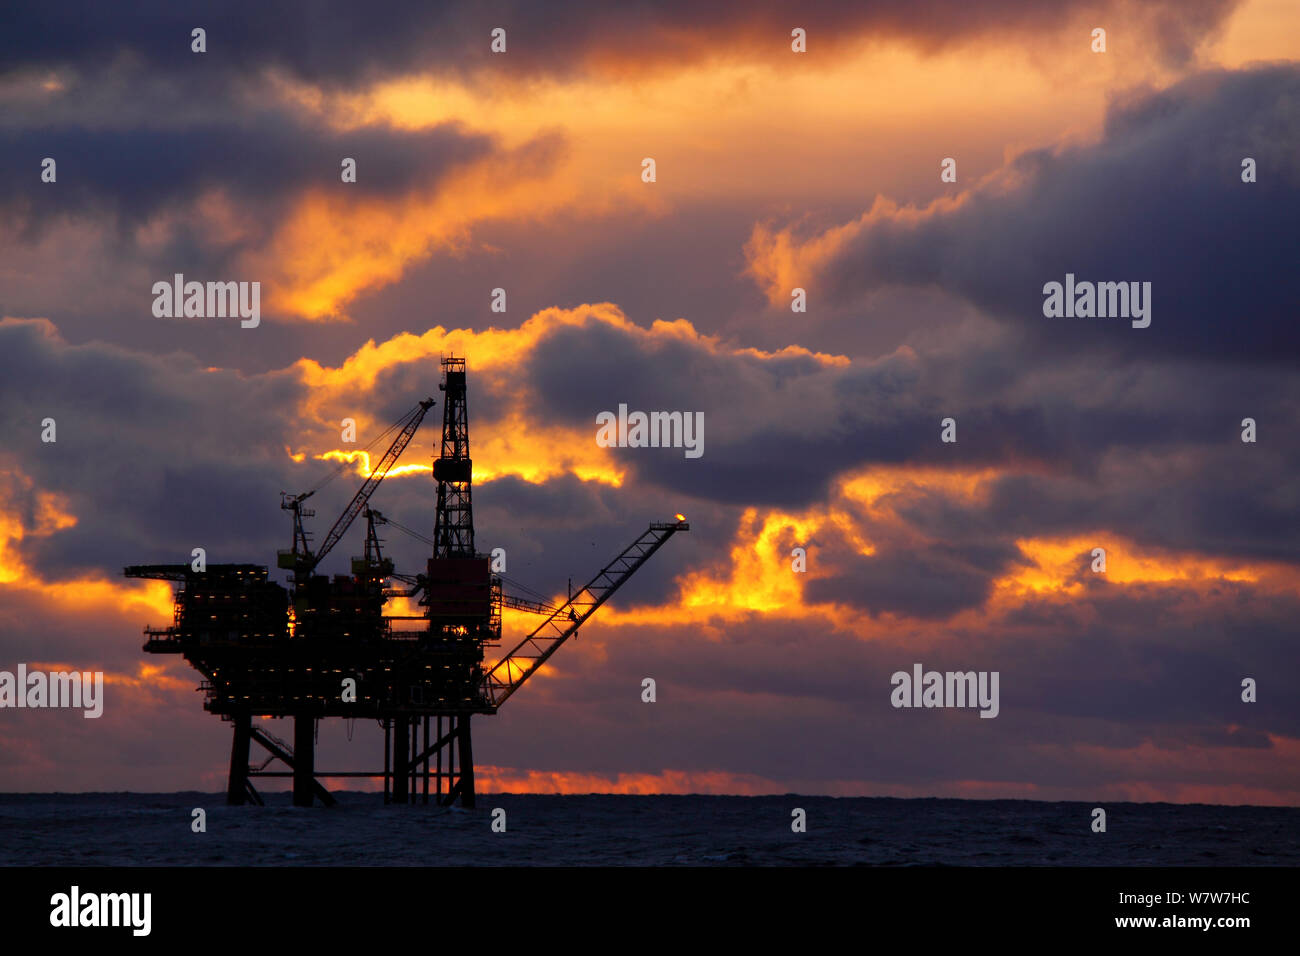 Sun setting at the Eider Platform, 60 miles northeast of Shetland, North Sea, November 2013. All non-editorial uses must be cleared individually. Stock Photo